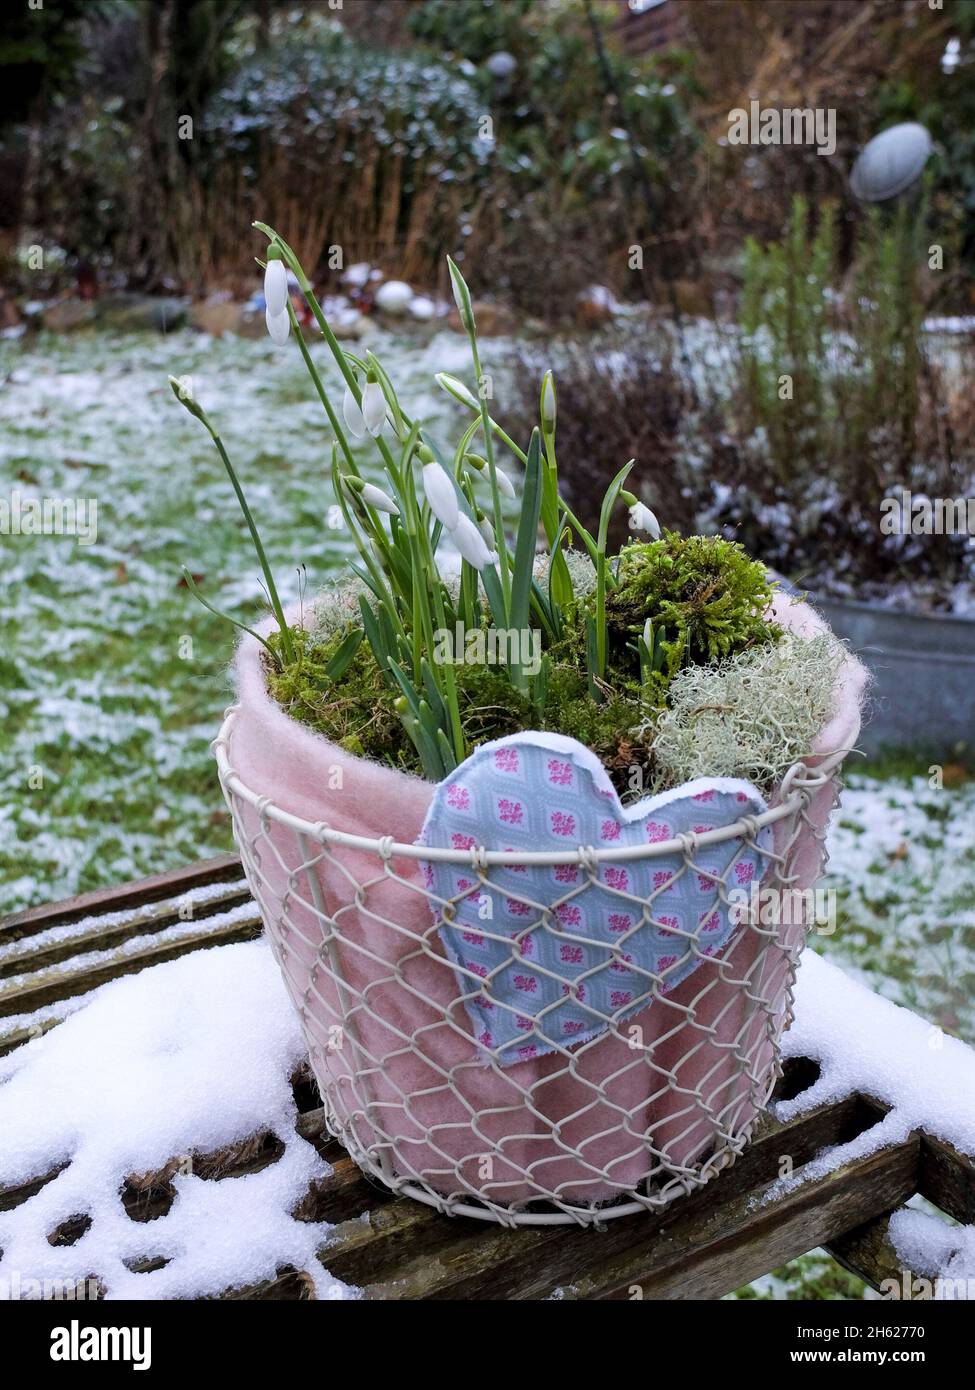 snowdrops (galanthus nivalis) in a pot Stock Photo